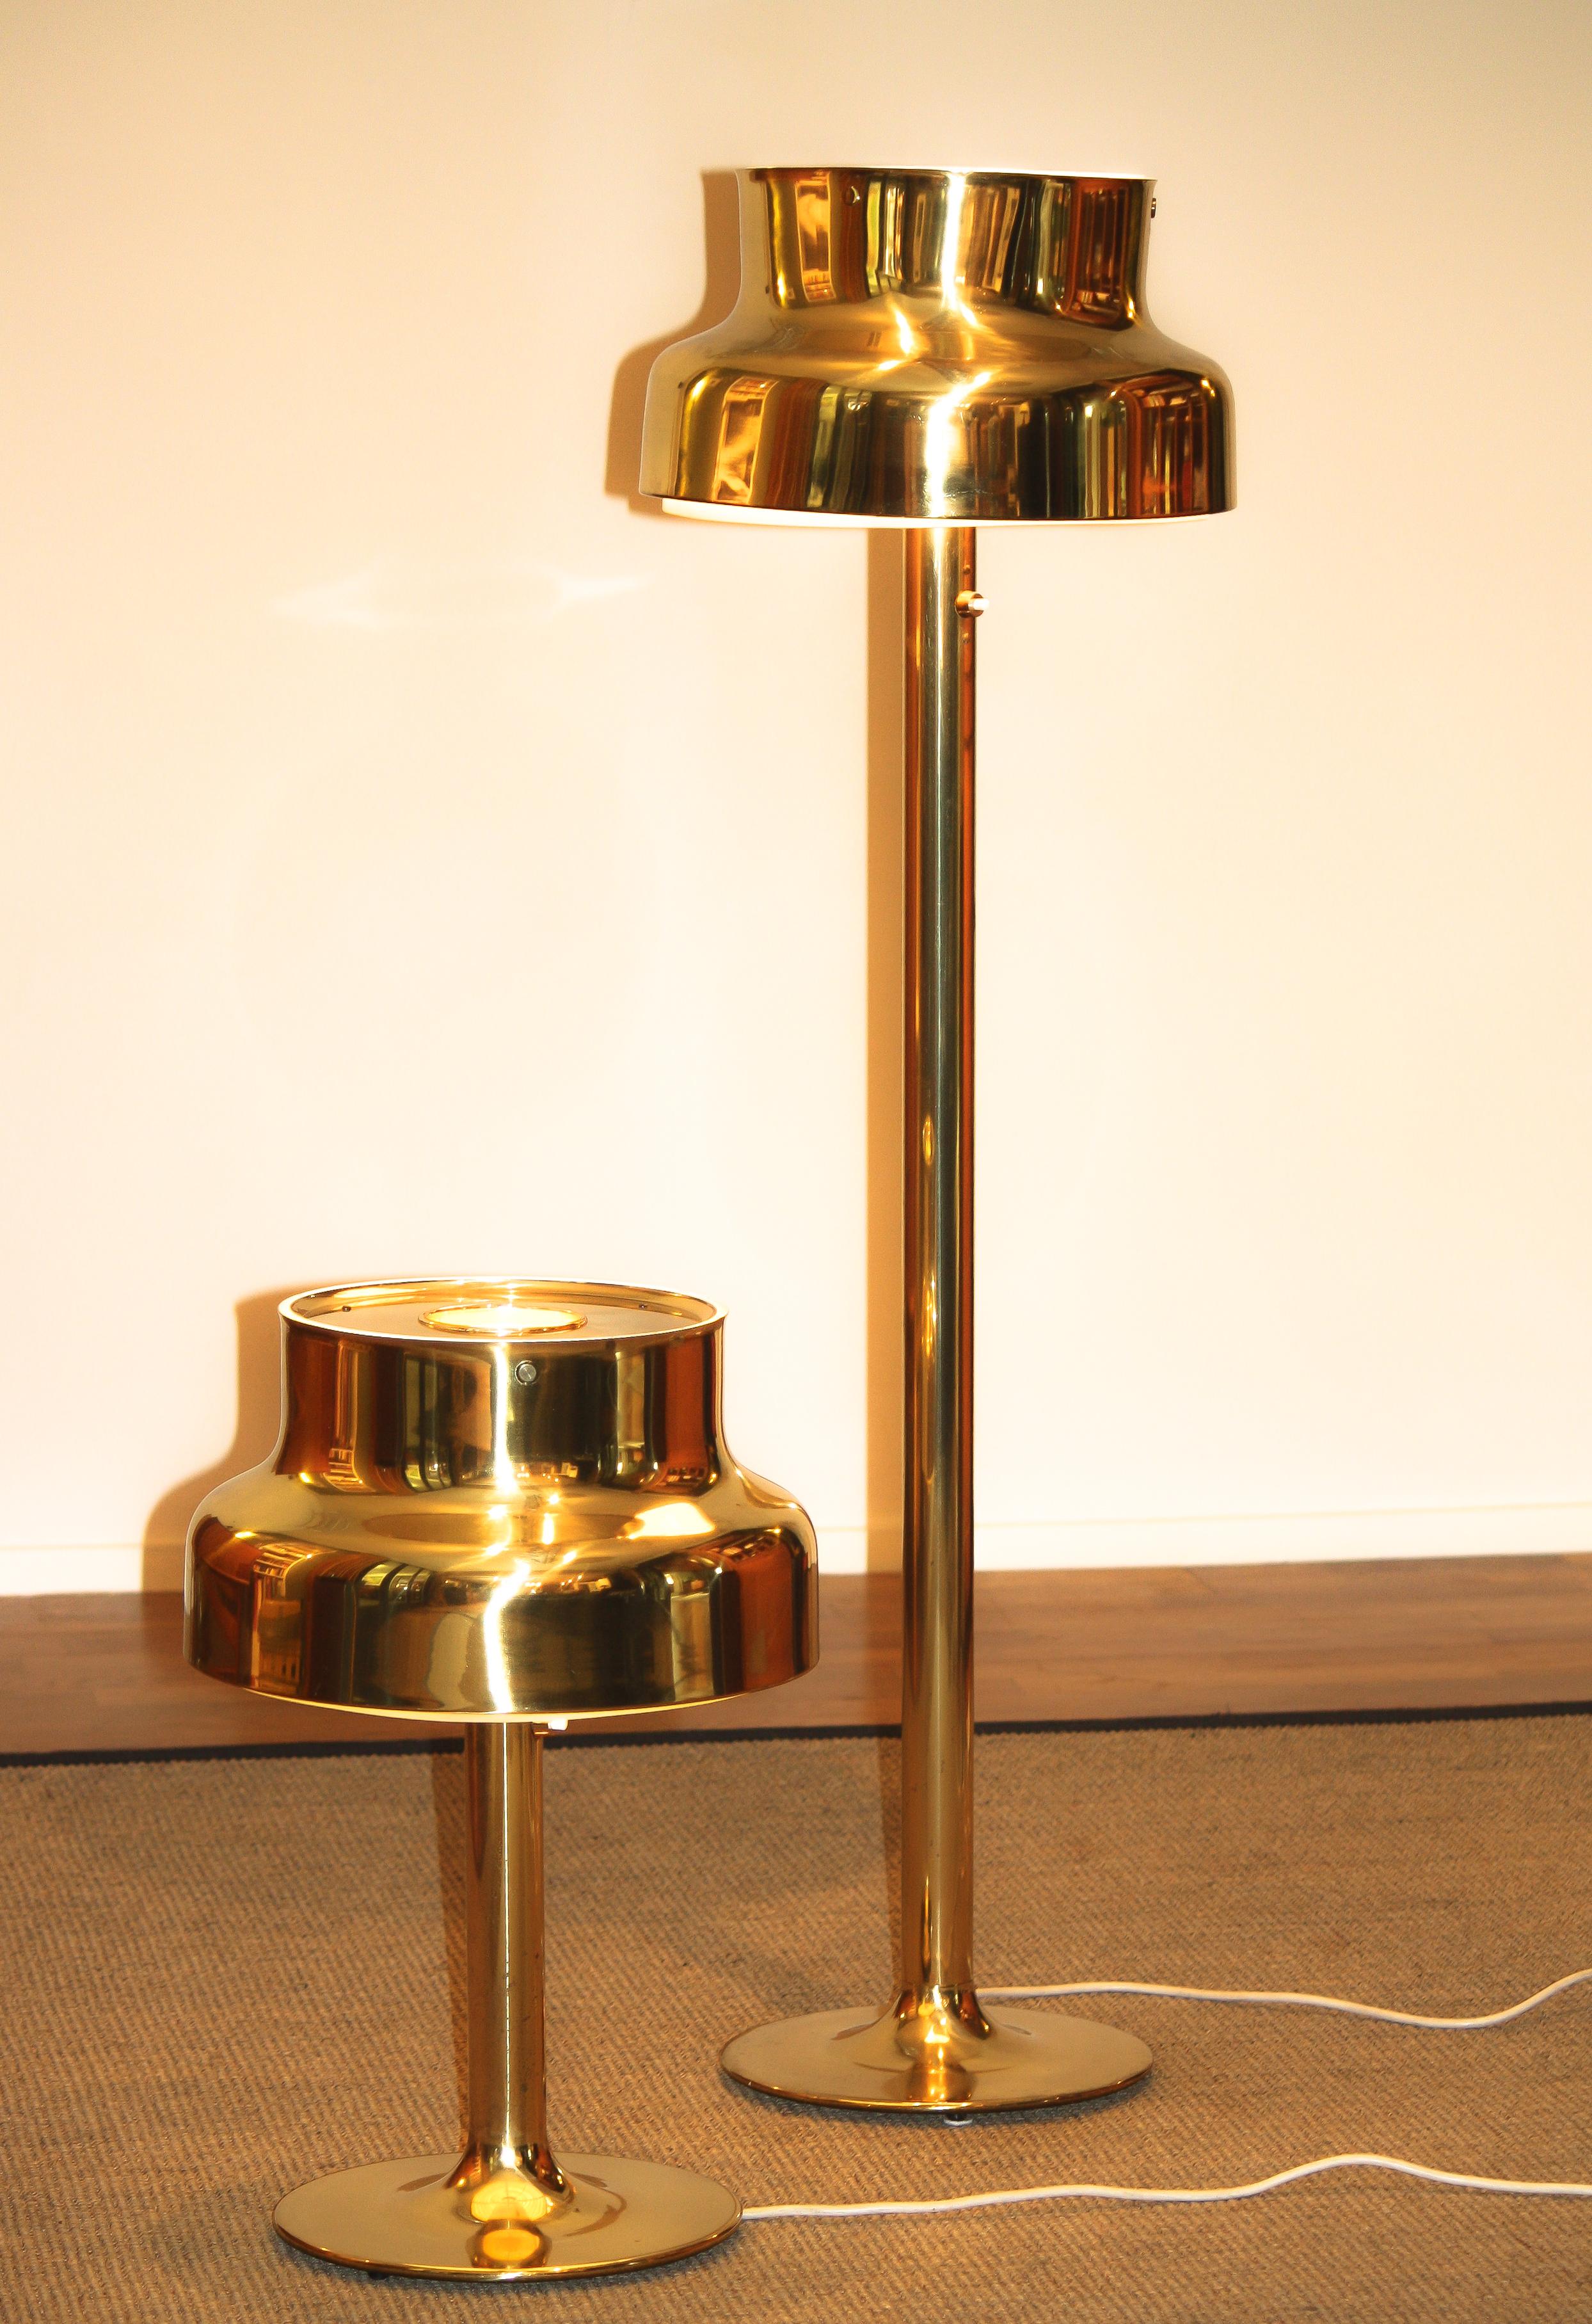 1960s Golden or Brass Floor Lamp by Anders Pehrson ‘Bumling’ for Ateljé Lyktan 3